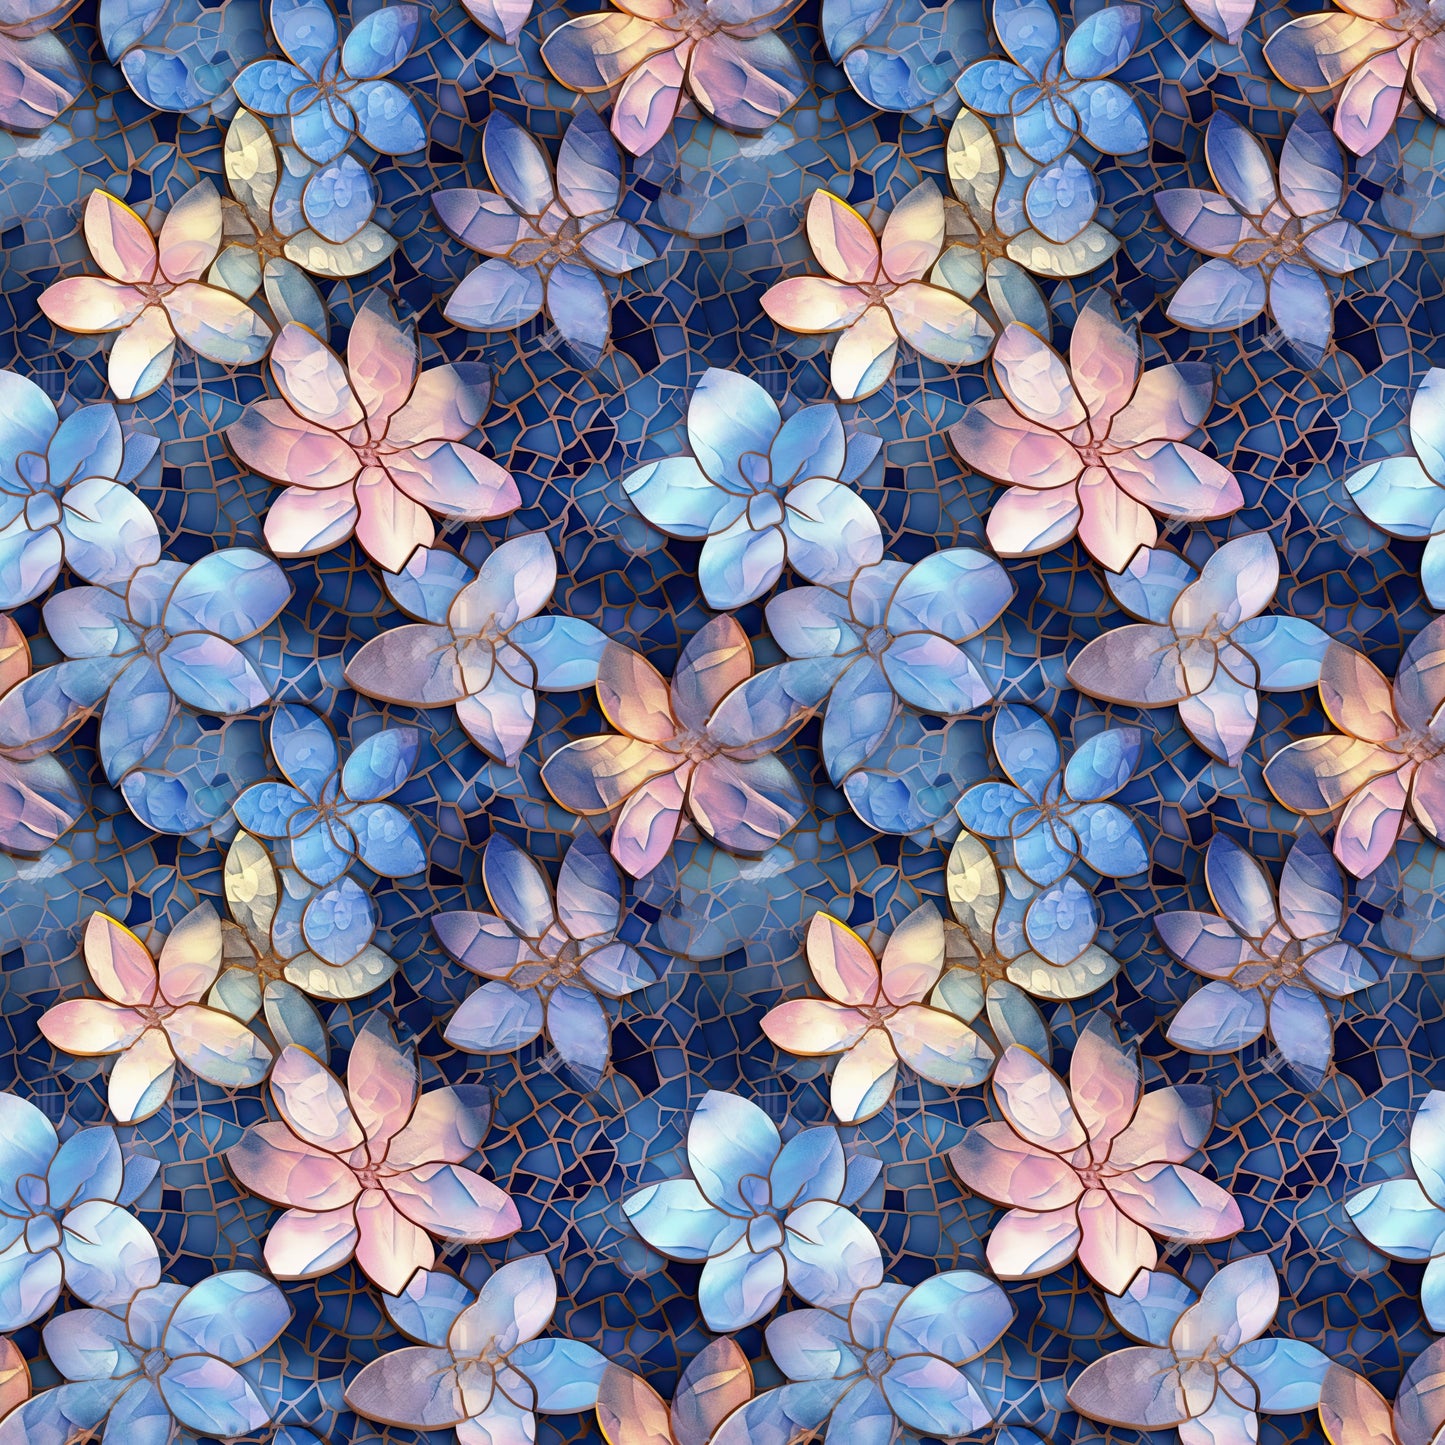 Mosaic in Blue and Pink Interlock